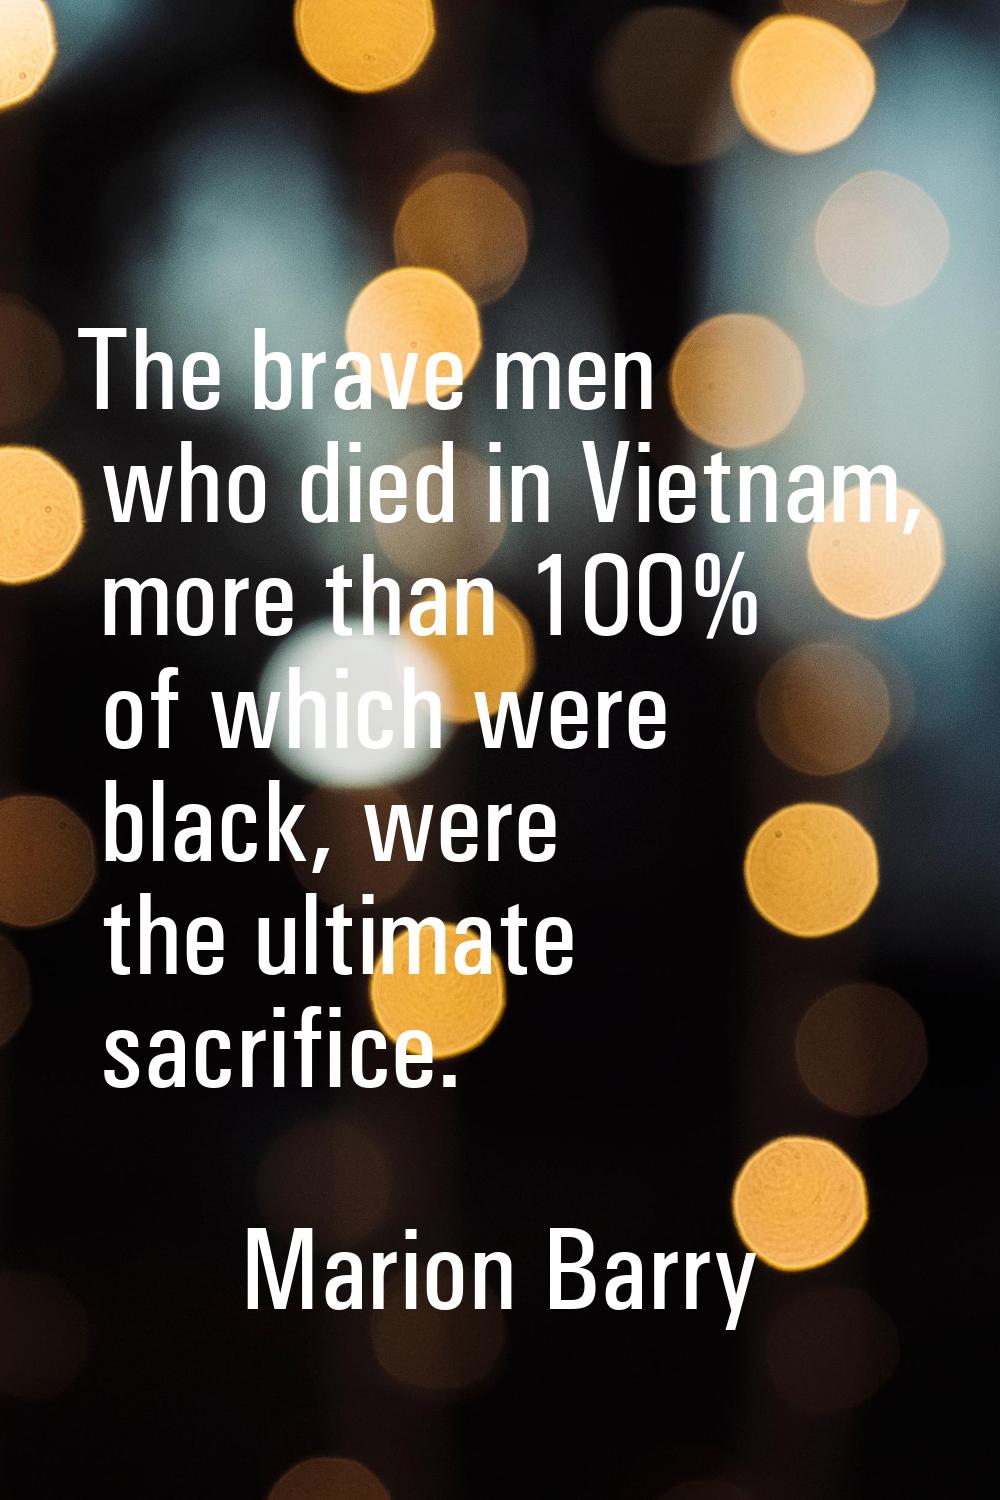 The brave men who died in Vietnam, more than 100% of which were black, were the ultimate sacrifice.